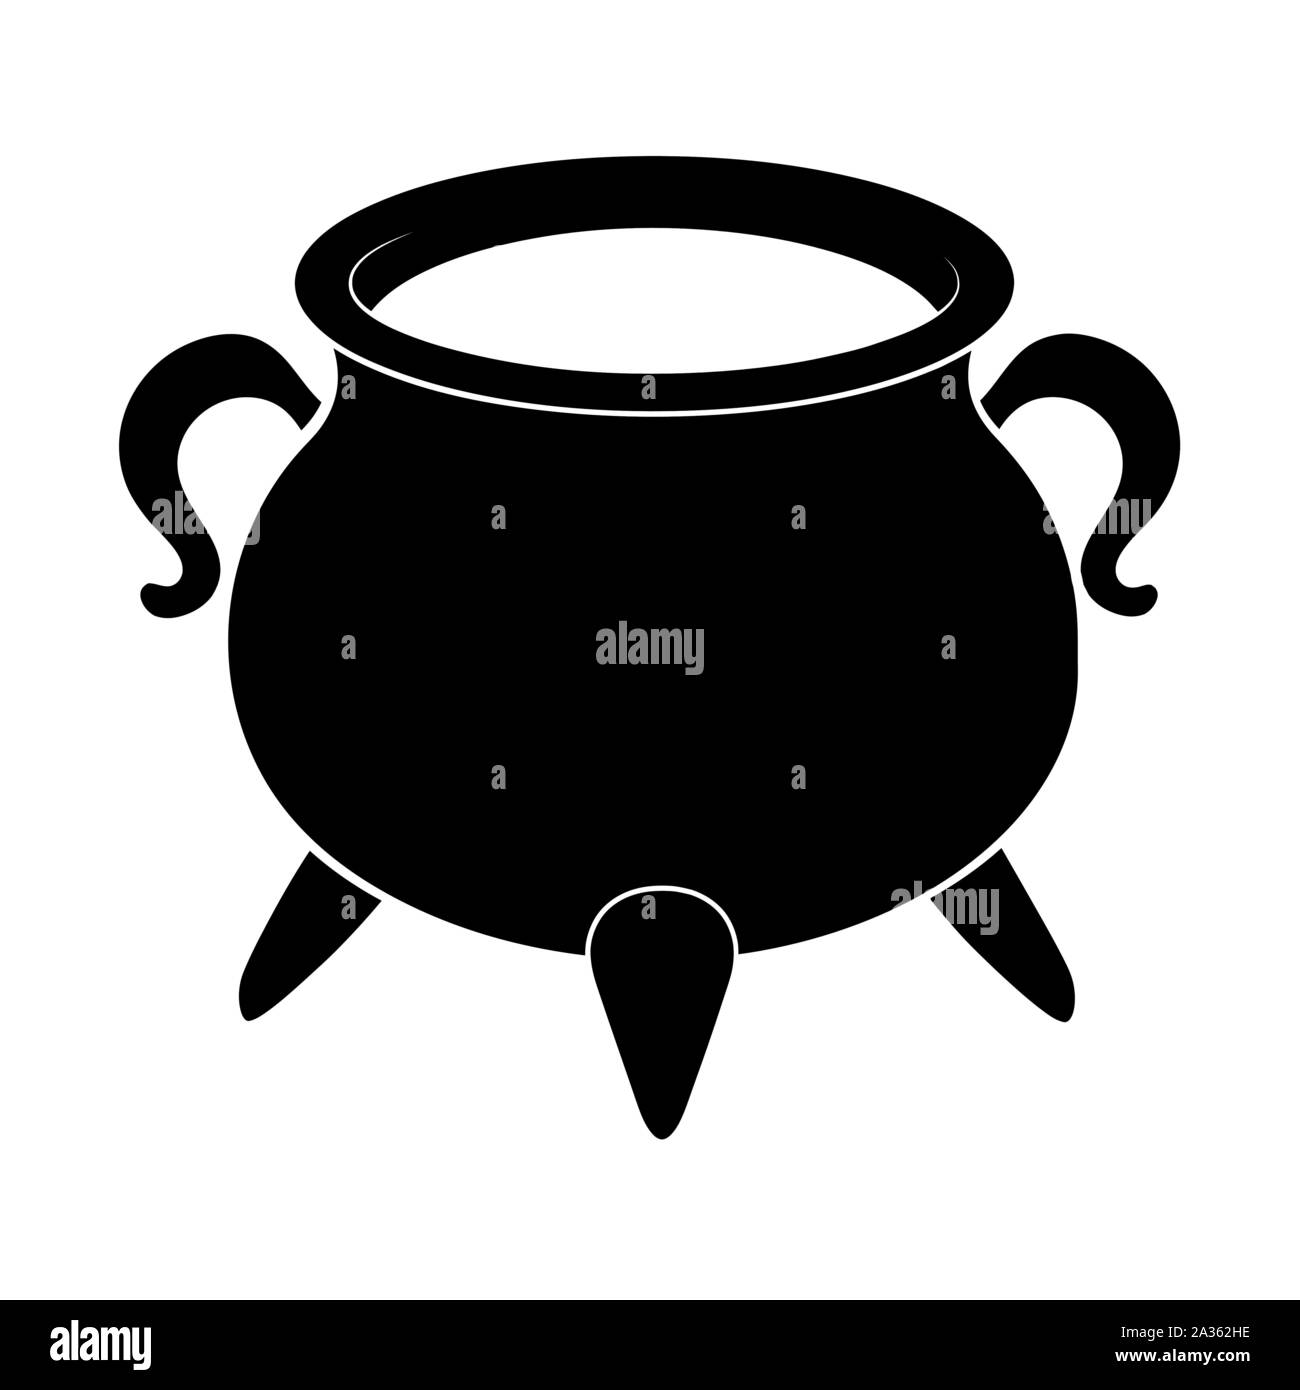 https://c8.alamy.com/comp/2A362HE/witch-cauldron-pot-silhouette-isolated-on-white-background-2A362HE.jpg